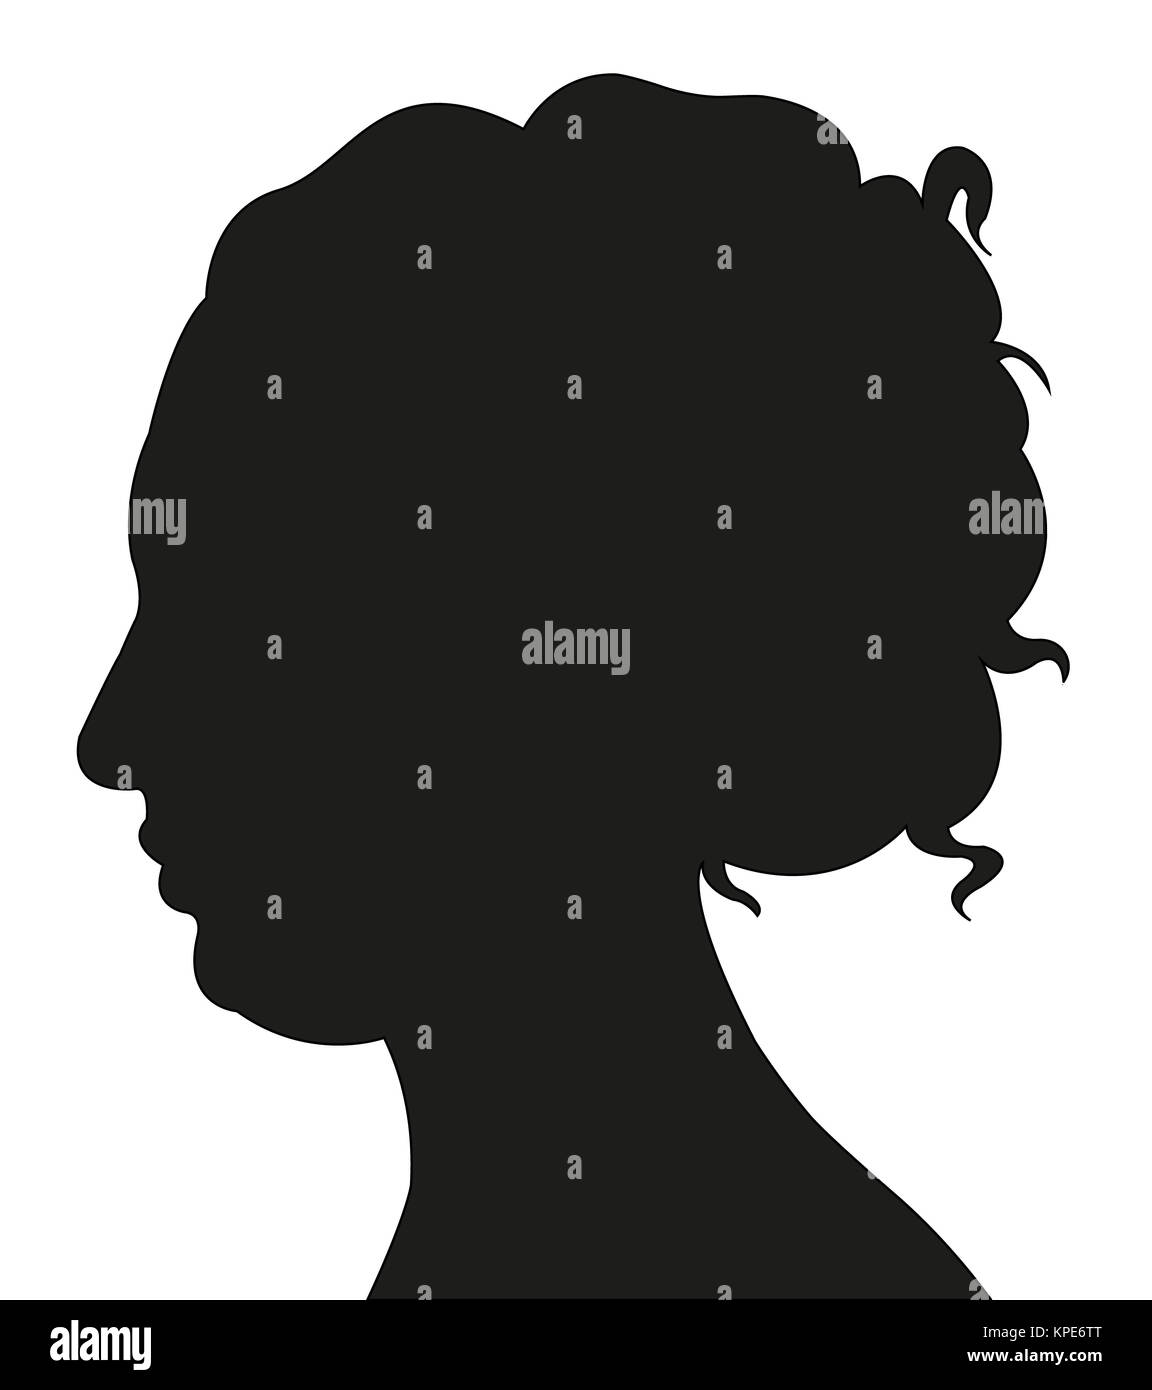 a lady head silhouette Stock Photo